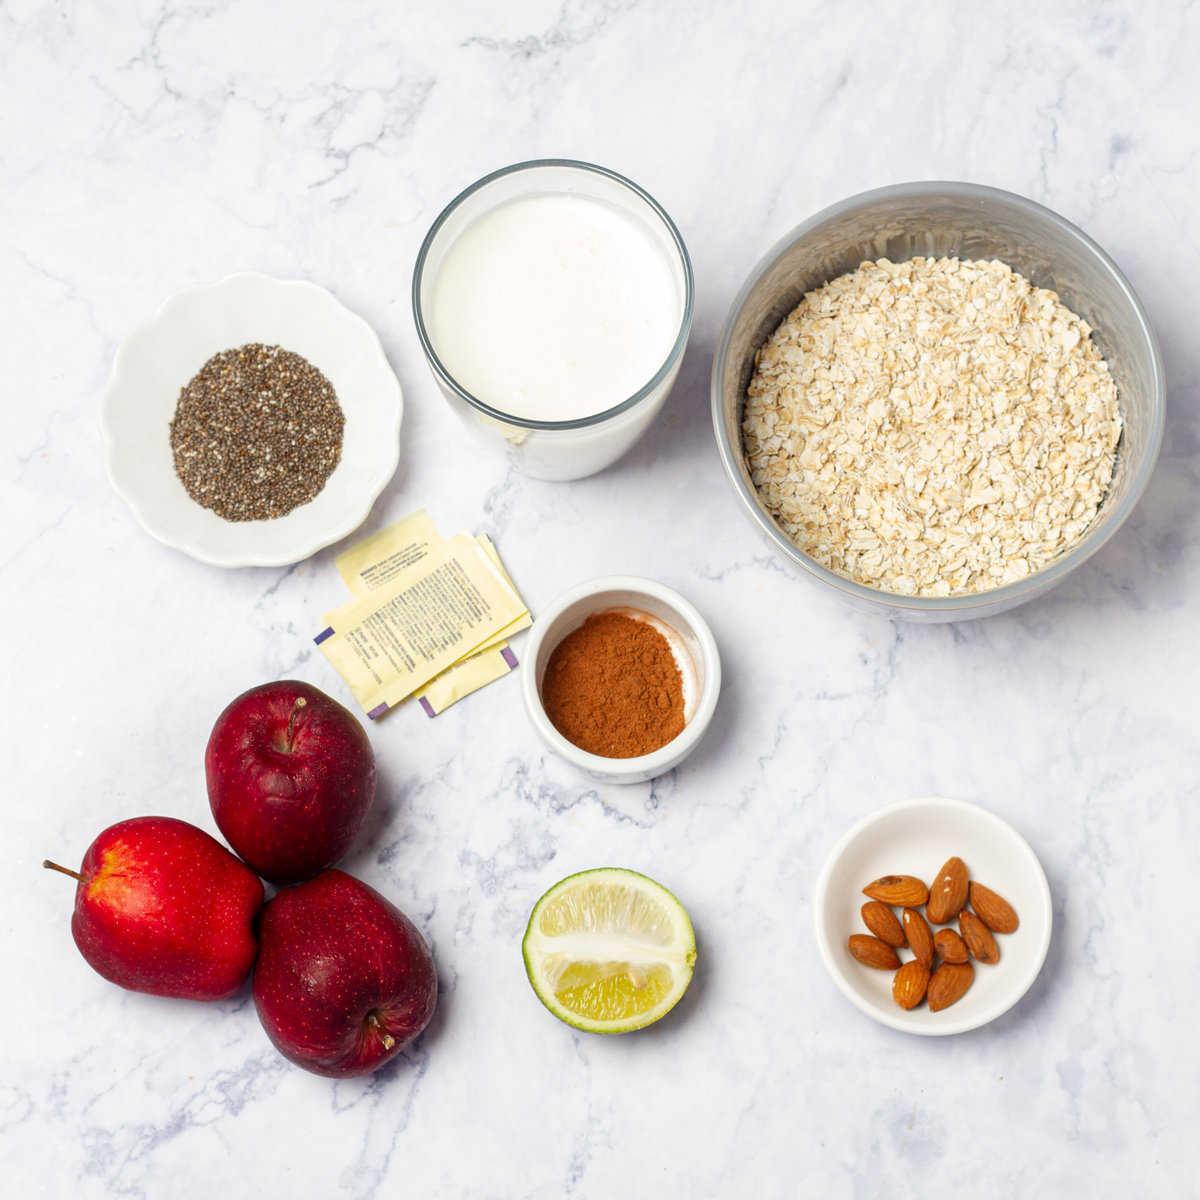 Apples, oats, chia seeds, milk, spices, and sweetener in separate dishes.